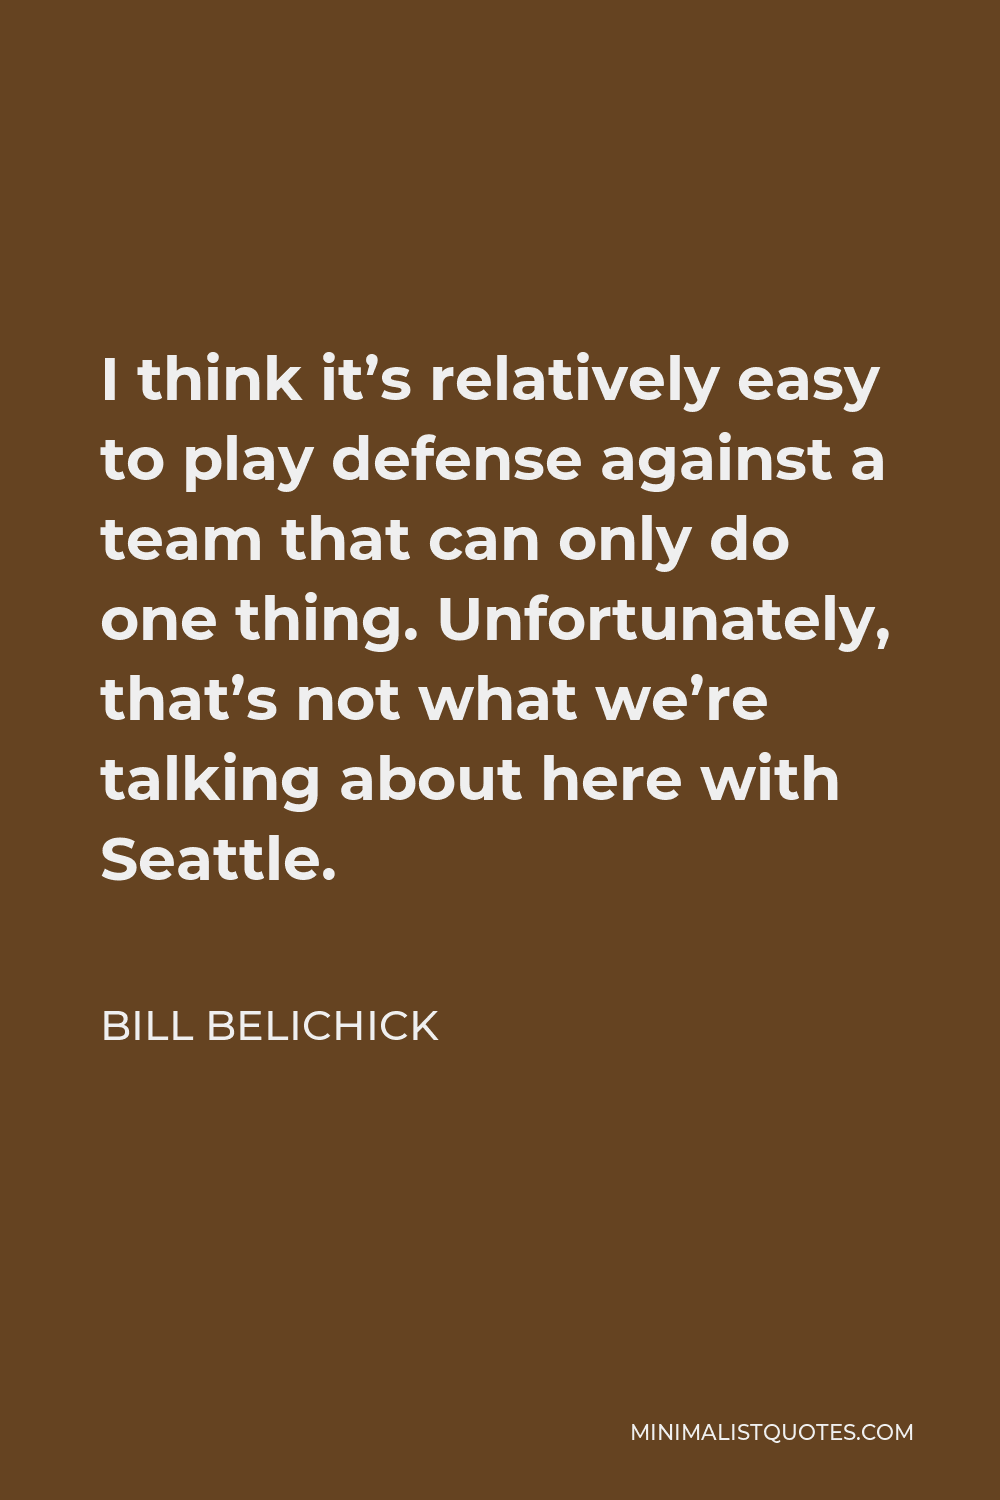 Bill Belichick Quote - I think it’s relatively easy to play defense against a team that can only do one thing. Unfortunately, that’s not what we’re talking about here with Seattle.